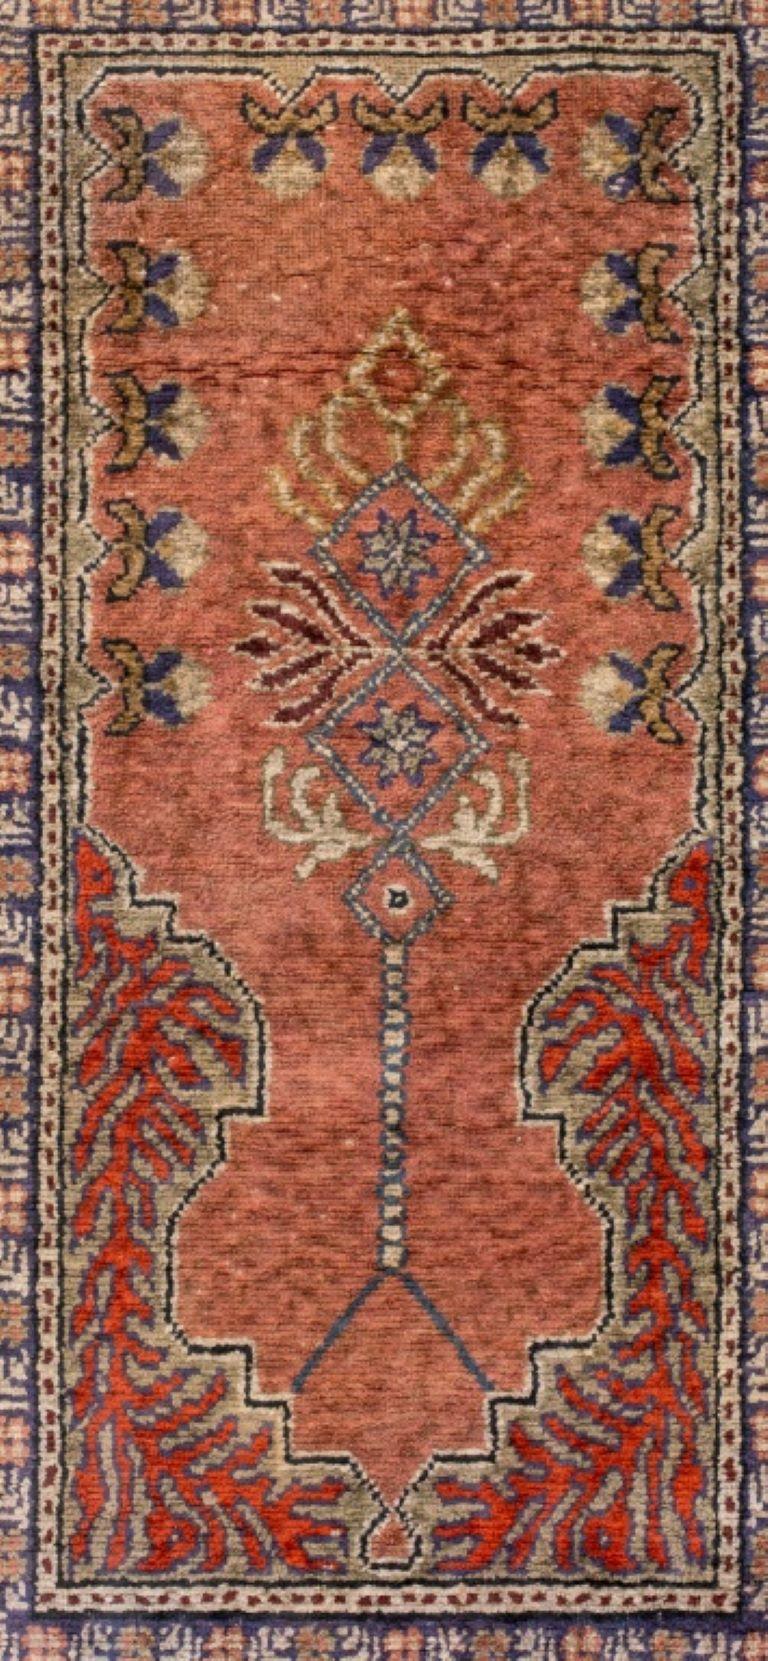 Turkish Prayer Rug 2.5' x 2' In Good Condition For Sale In New York, NY